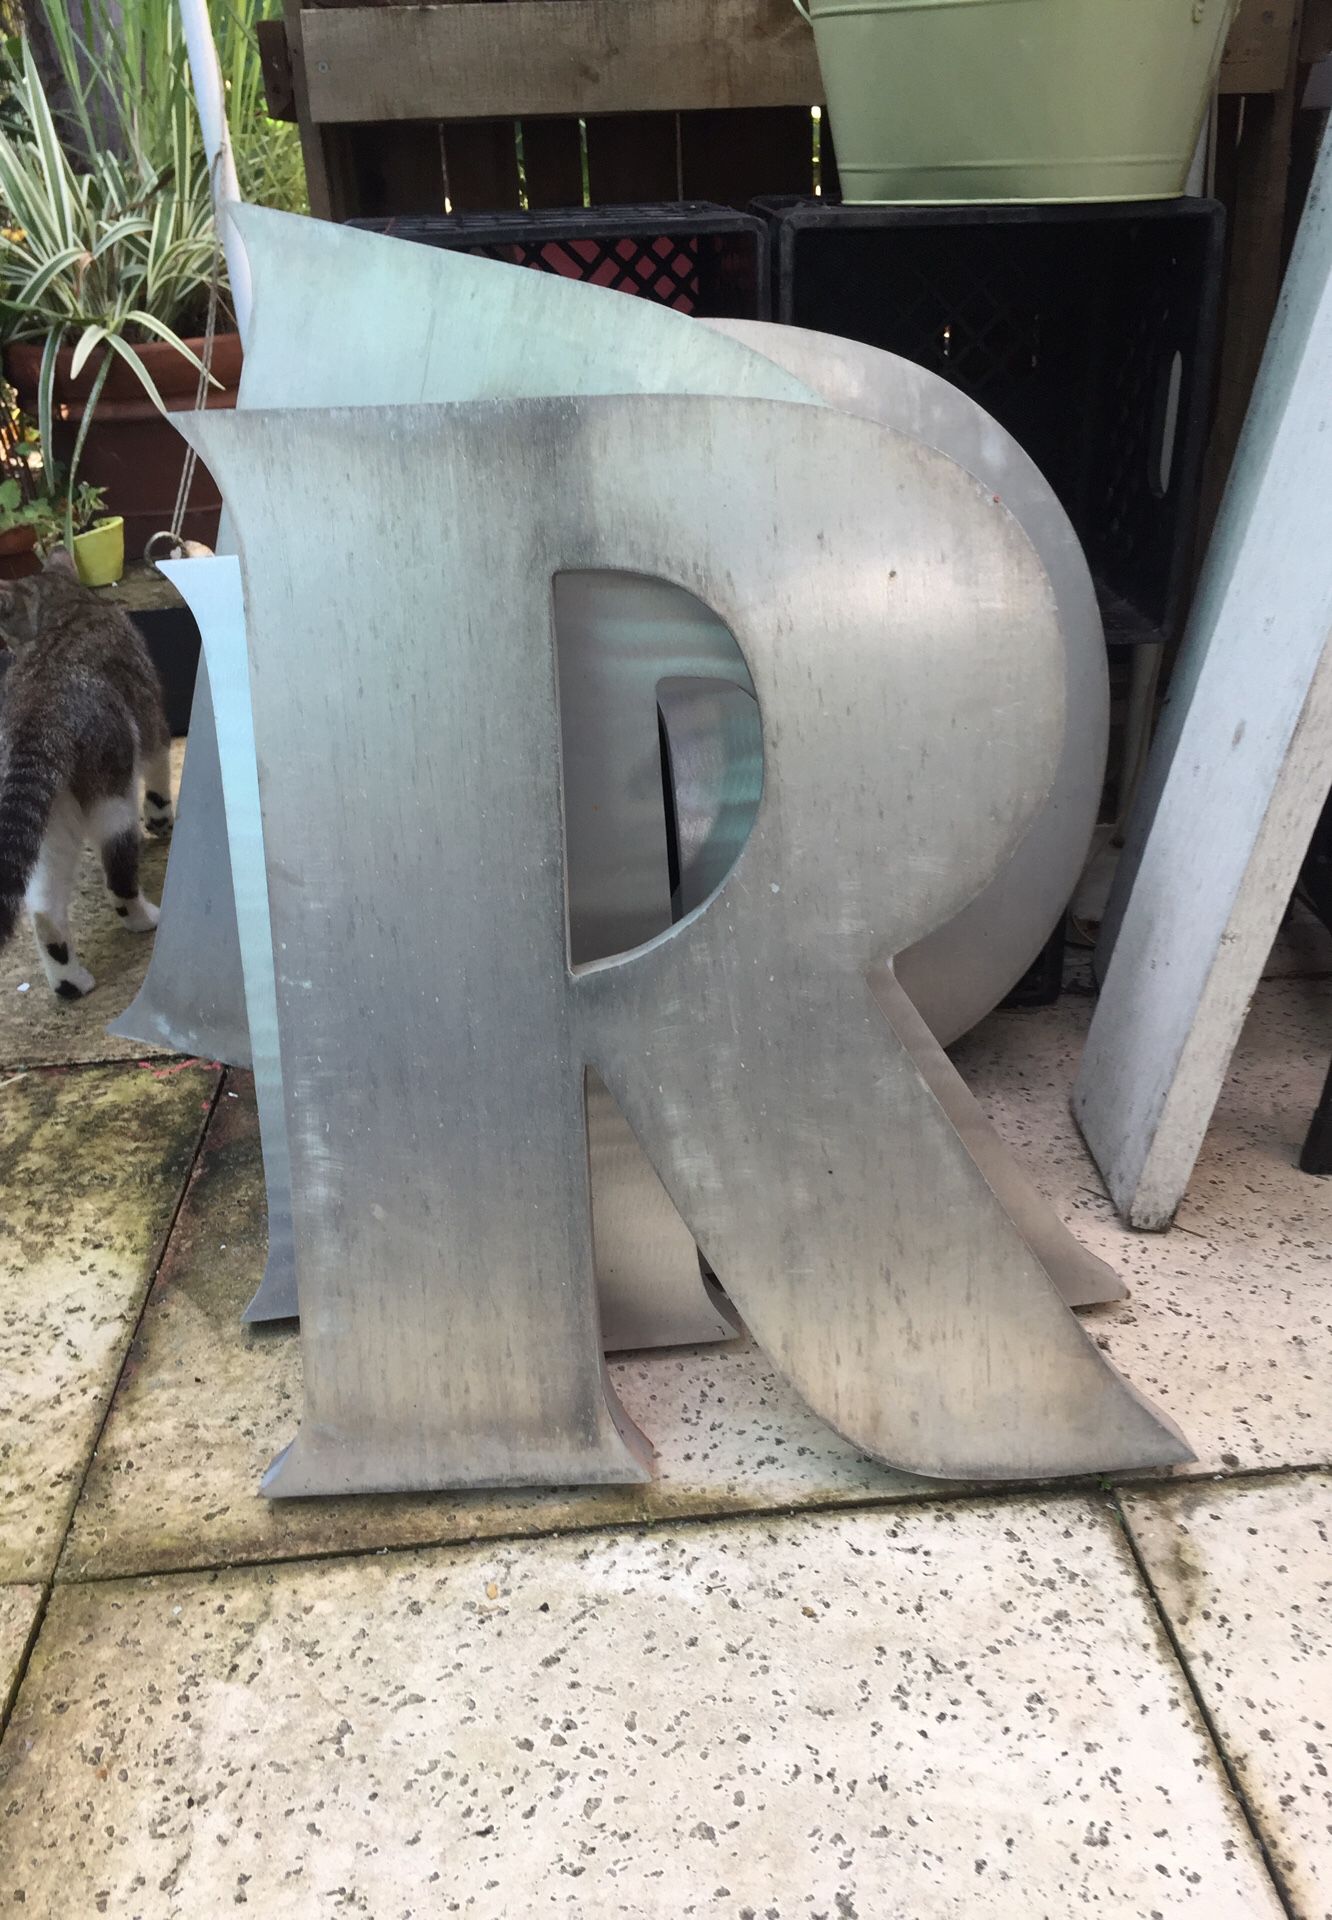 Large marquee channel aluminum letter R,24”,upcycled business signage,outdoor garden art wedding decoration